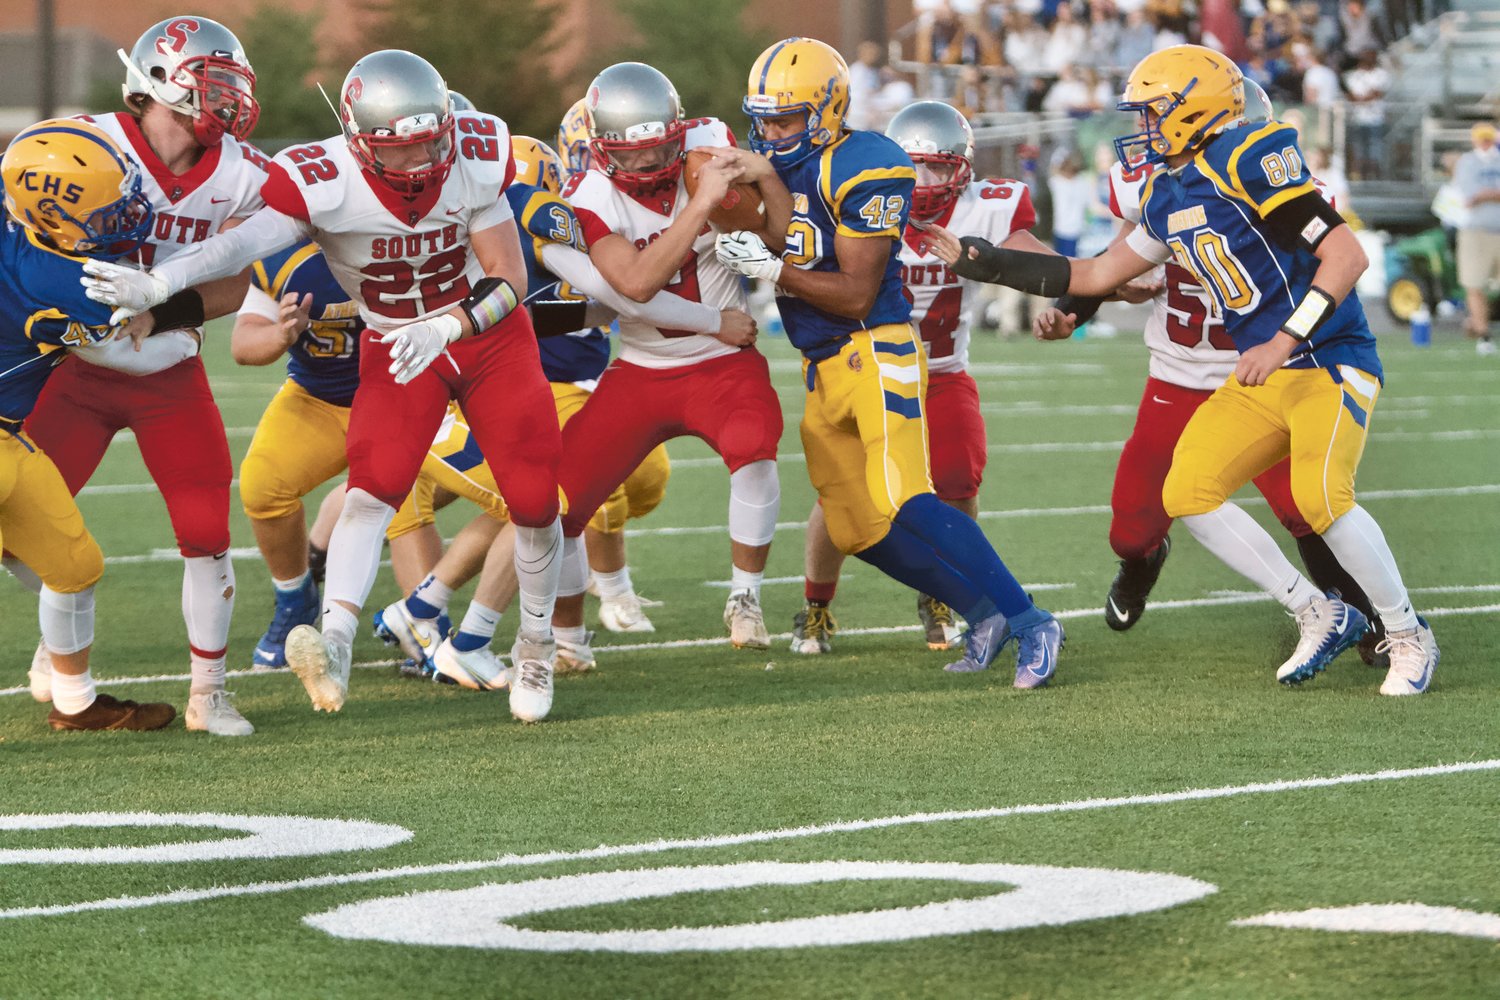 Crawfordsville defense tries to keep Isaiah McMasters from a first down.